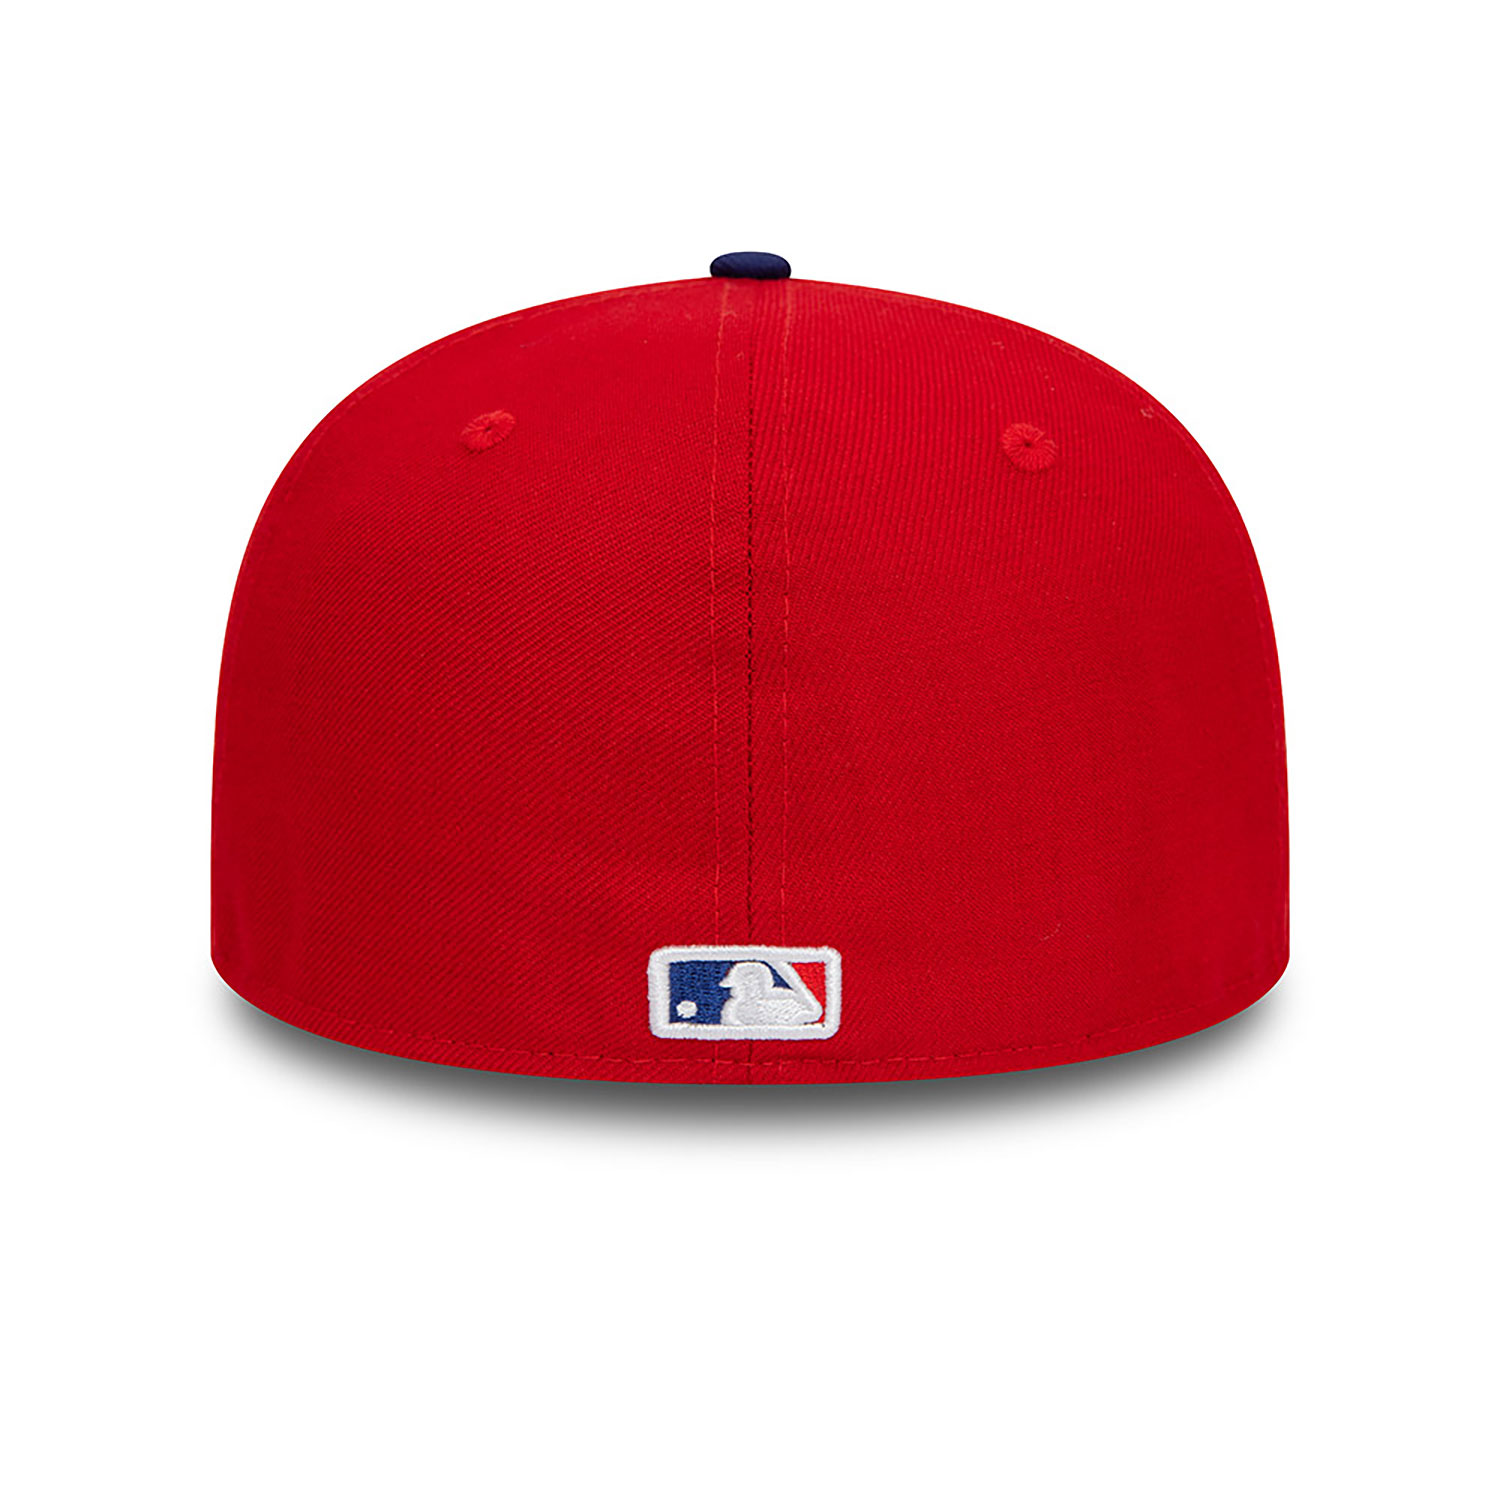 Philadelphia Phillies MLB Icy Patch Red 59FIFTY Fitted Cap